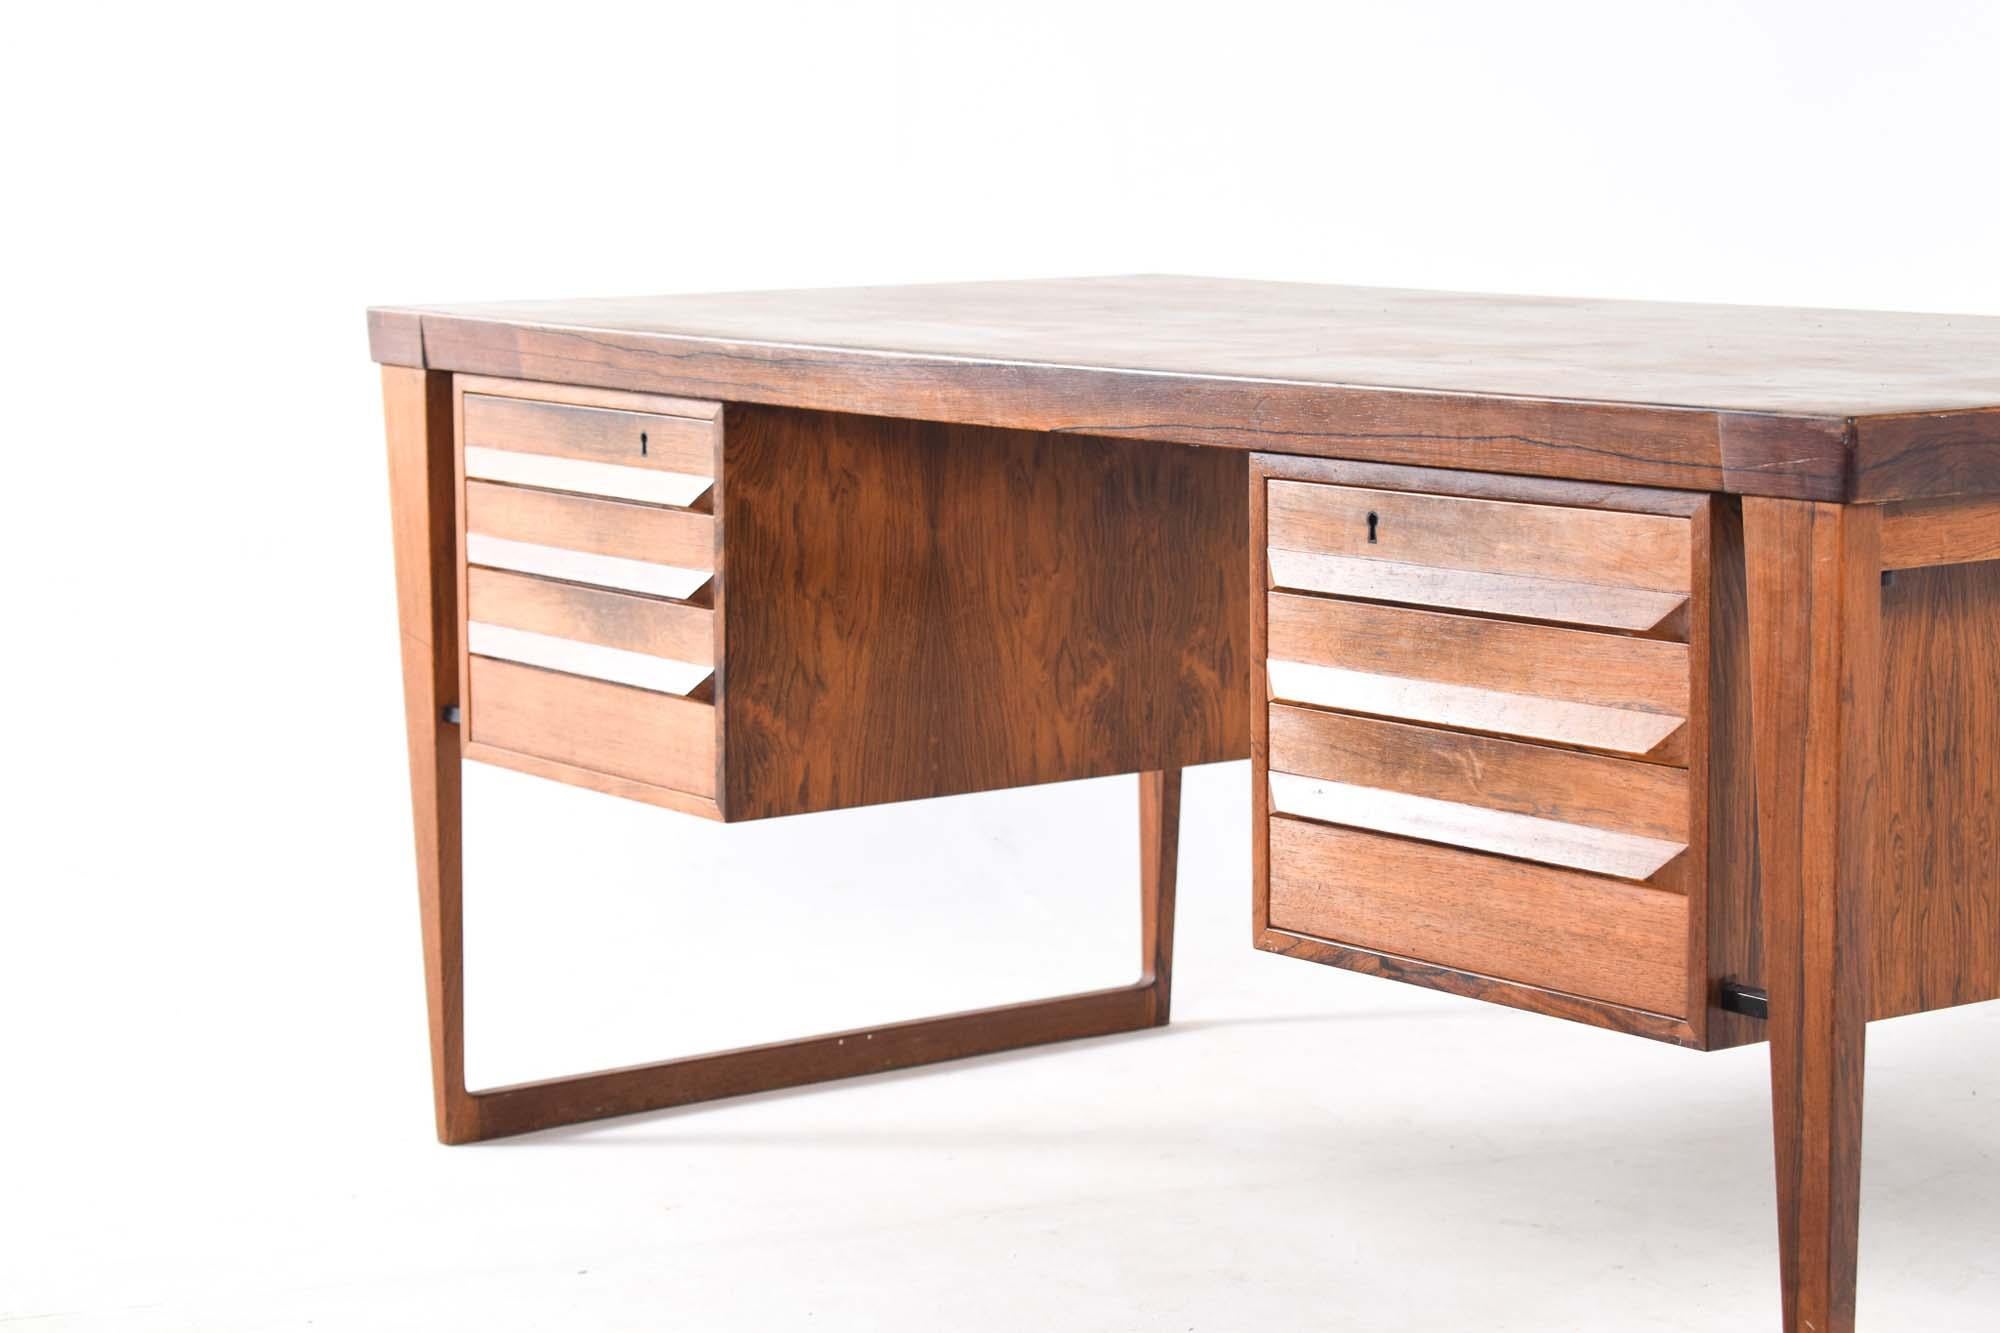 Kai Kristiansen design this large desk in 1950s for Feldballe Mobelfabrik. Iconic Model 70. The desk have six drawers on the front and two doors on the backside. This executive desk was crafted in rosewood and features a large surface top supported